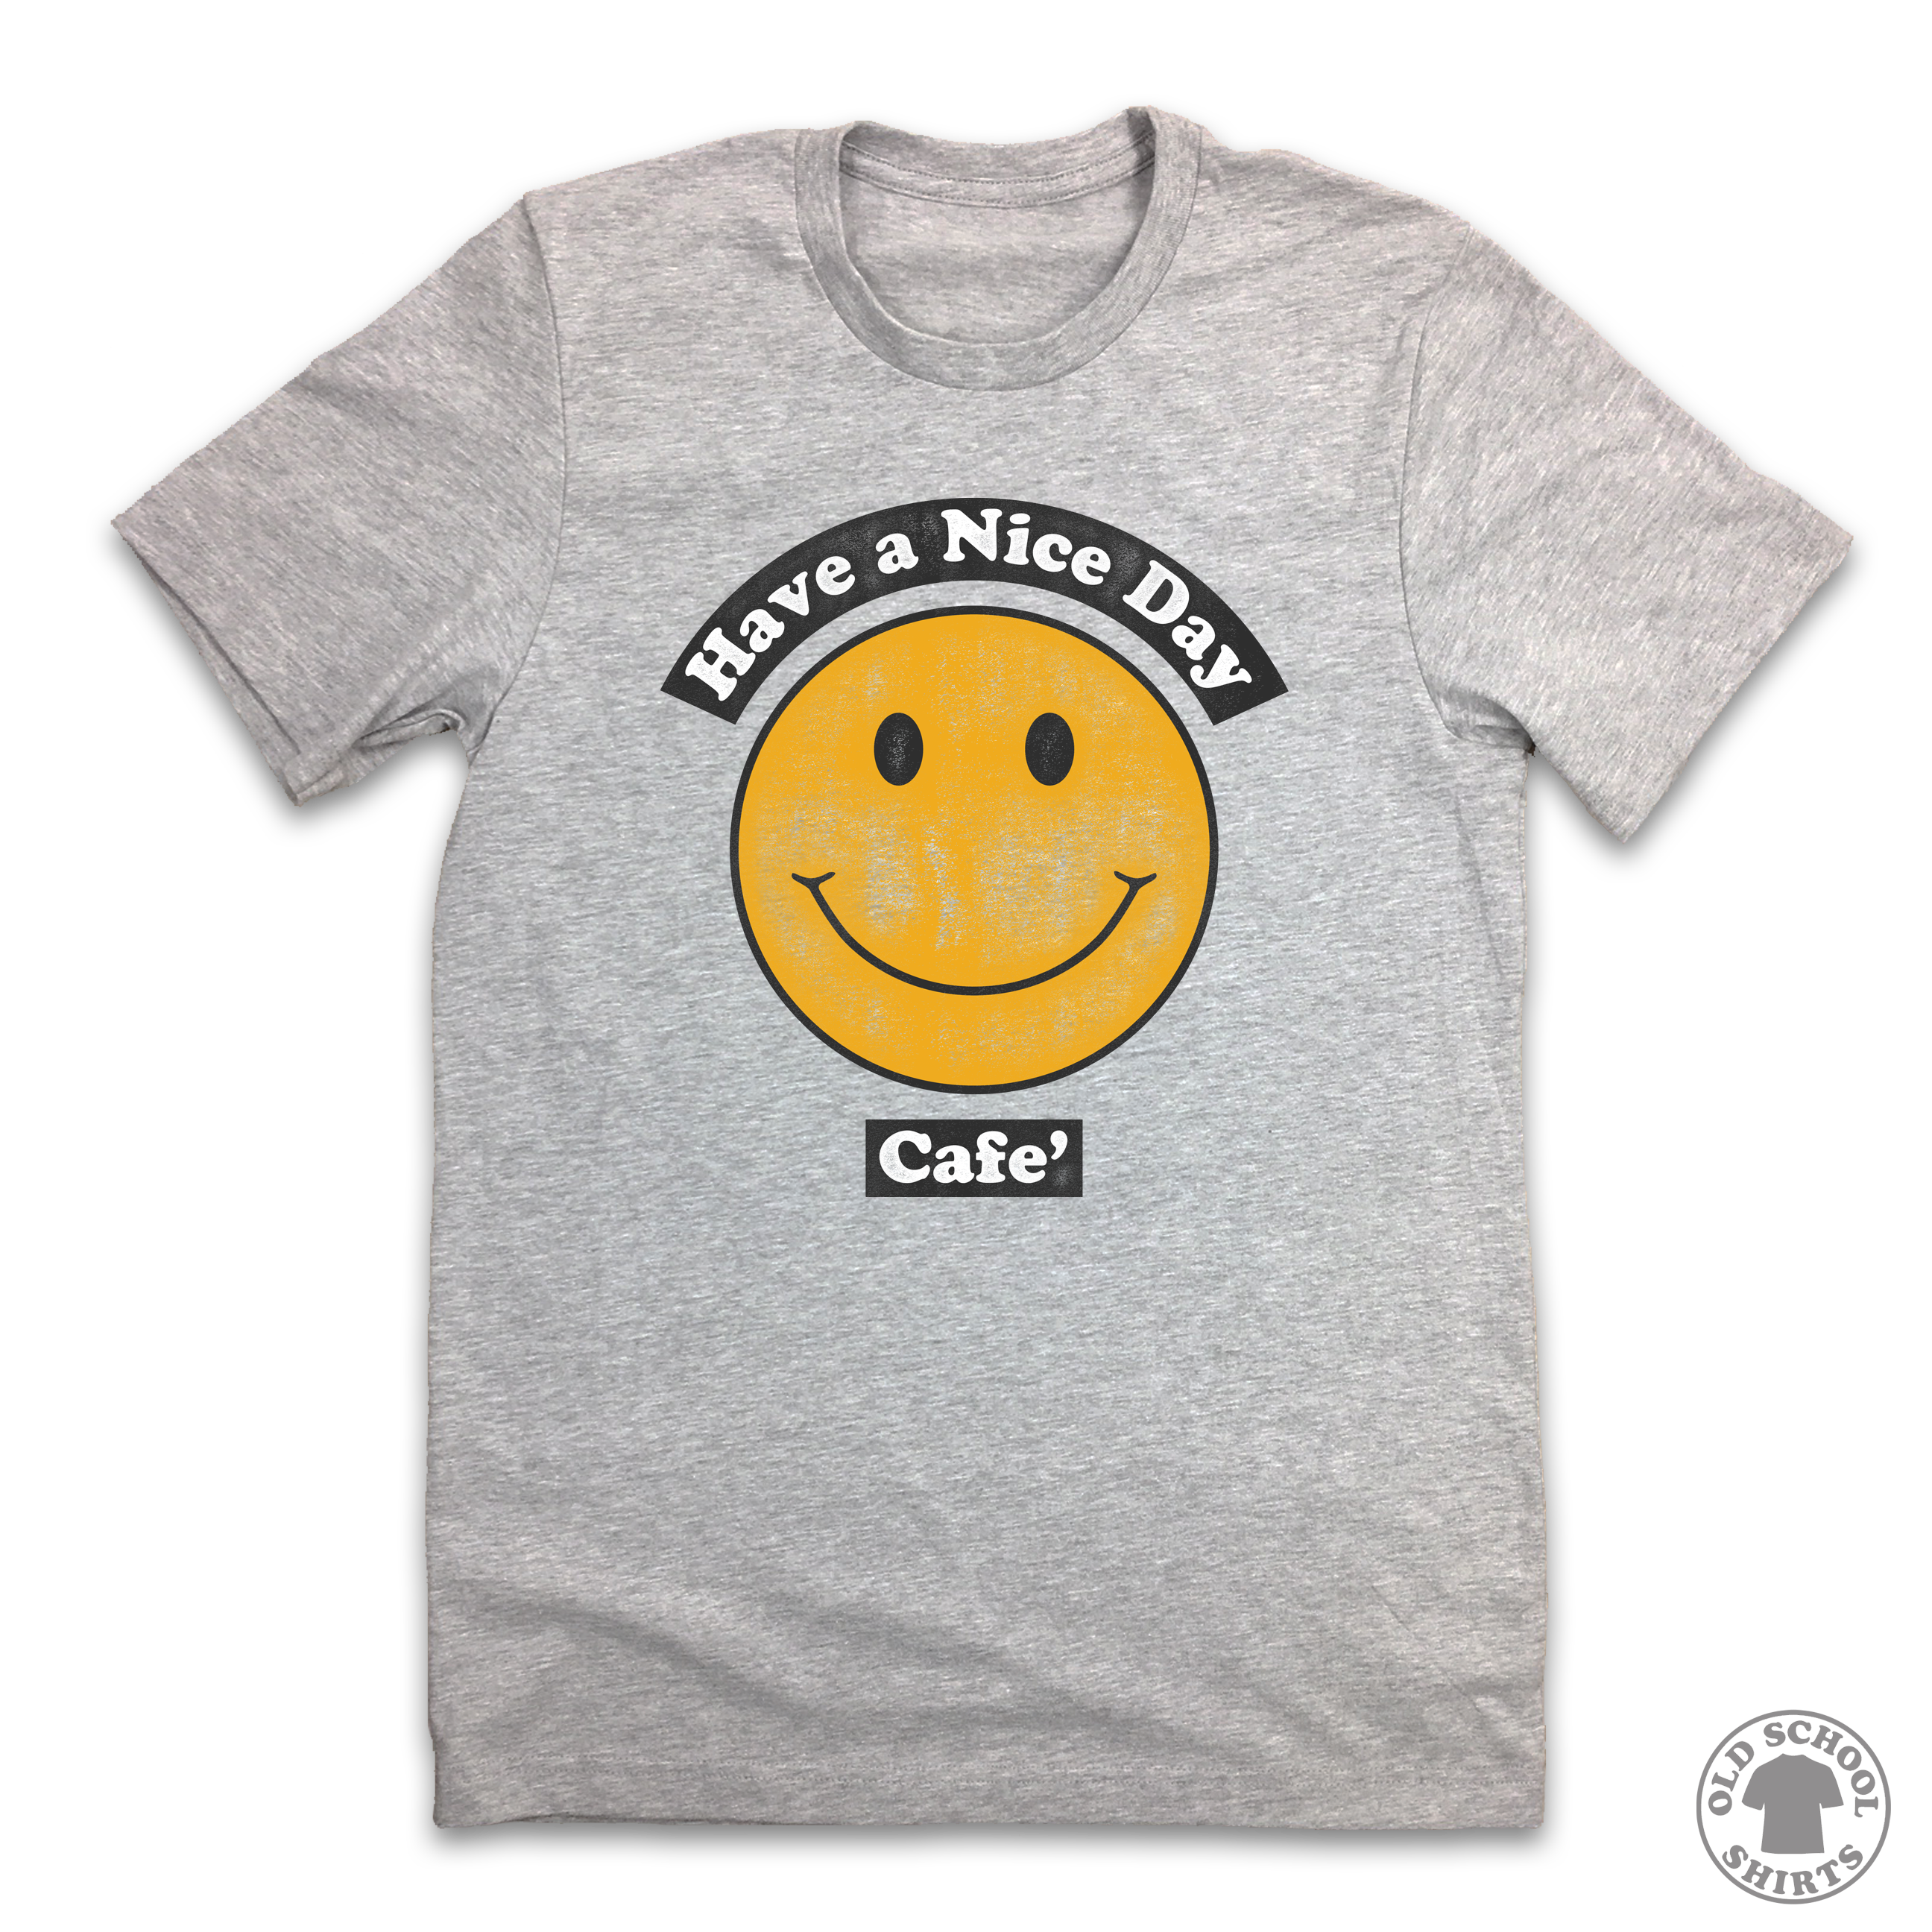 Have A Nice Day Cafe - Old School Shirts- Retro Sports T Shirts